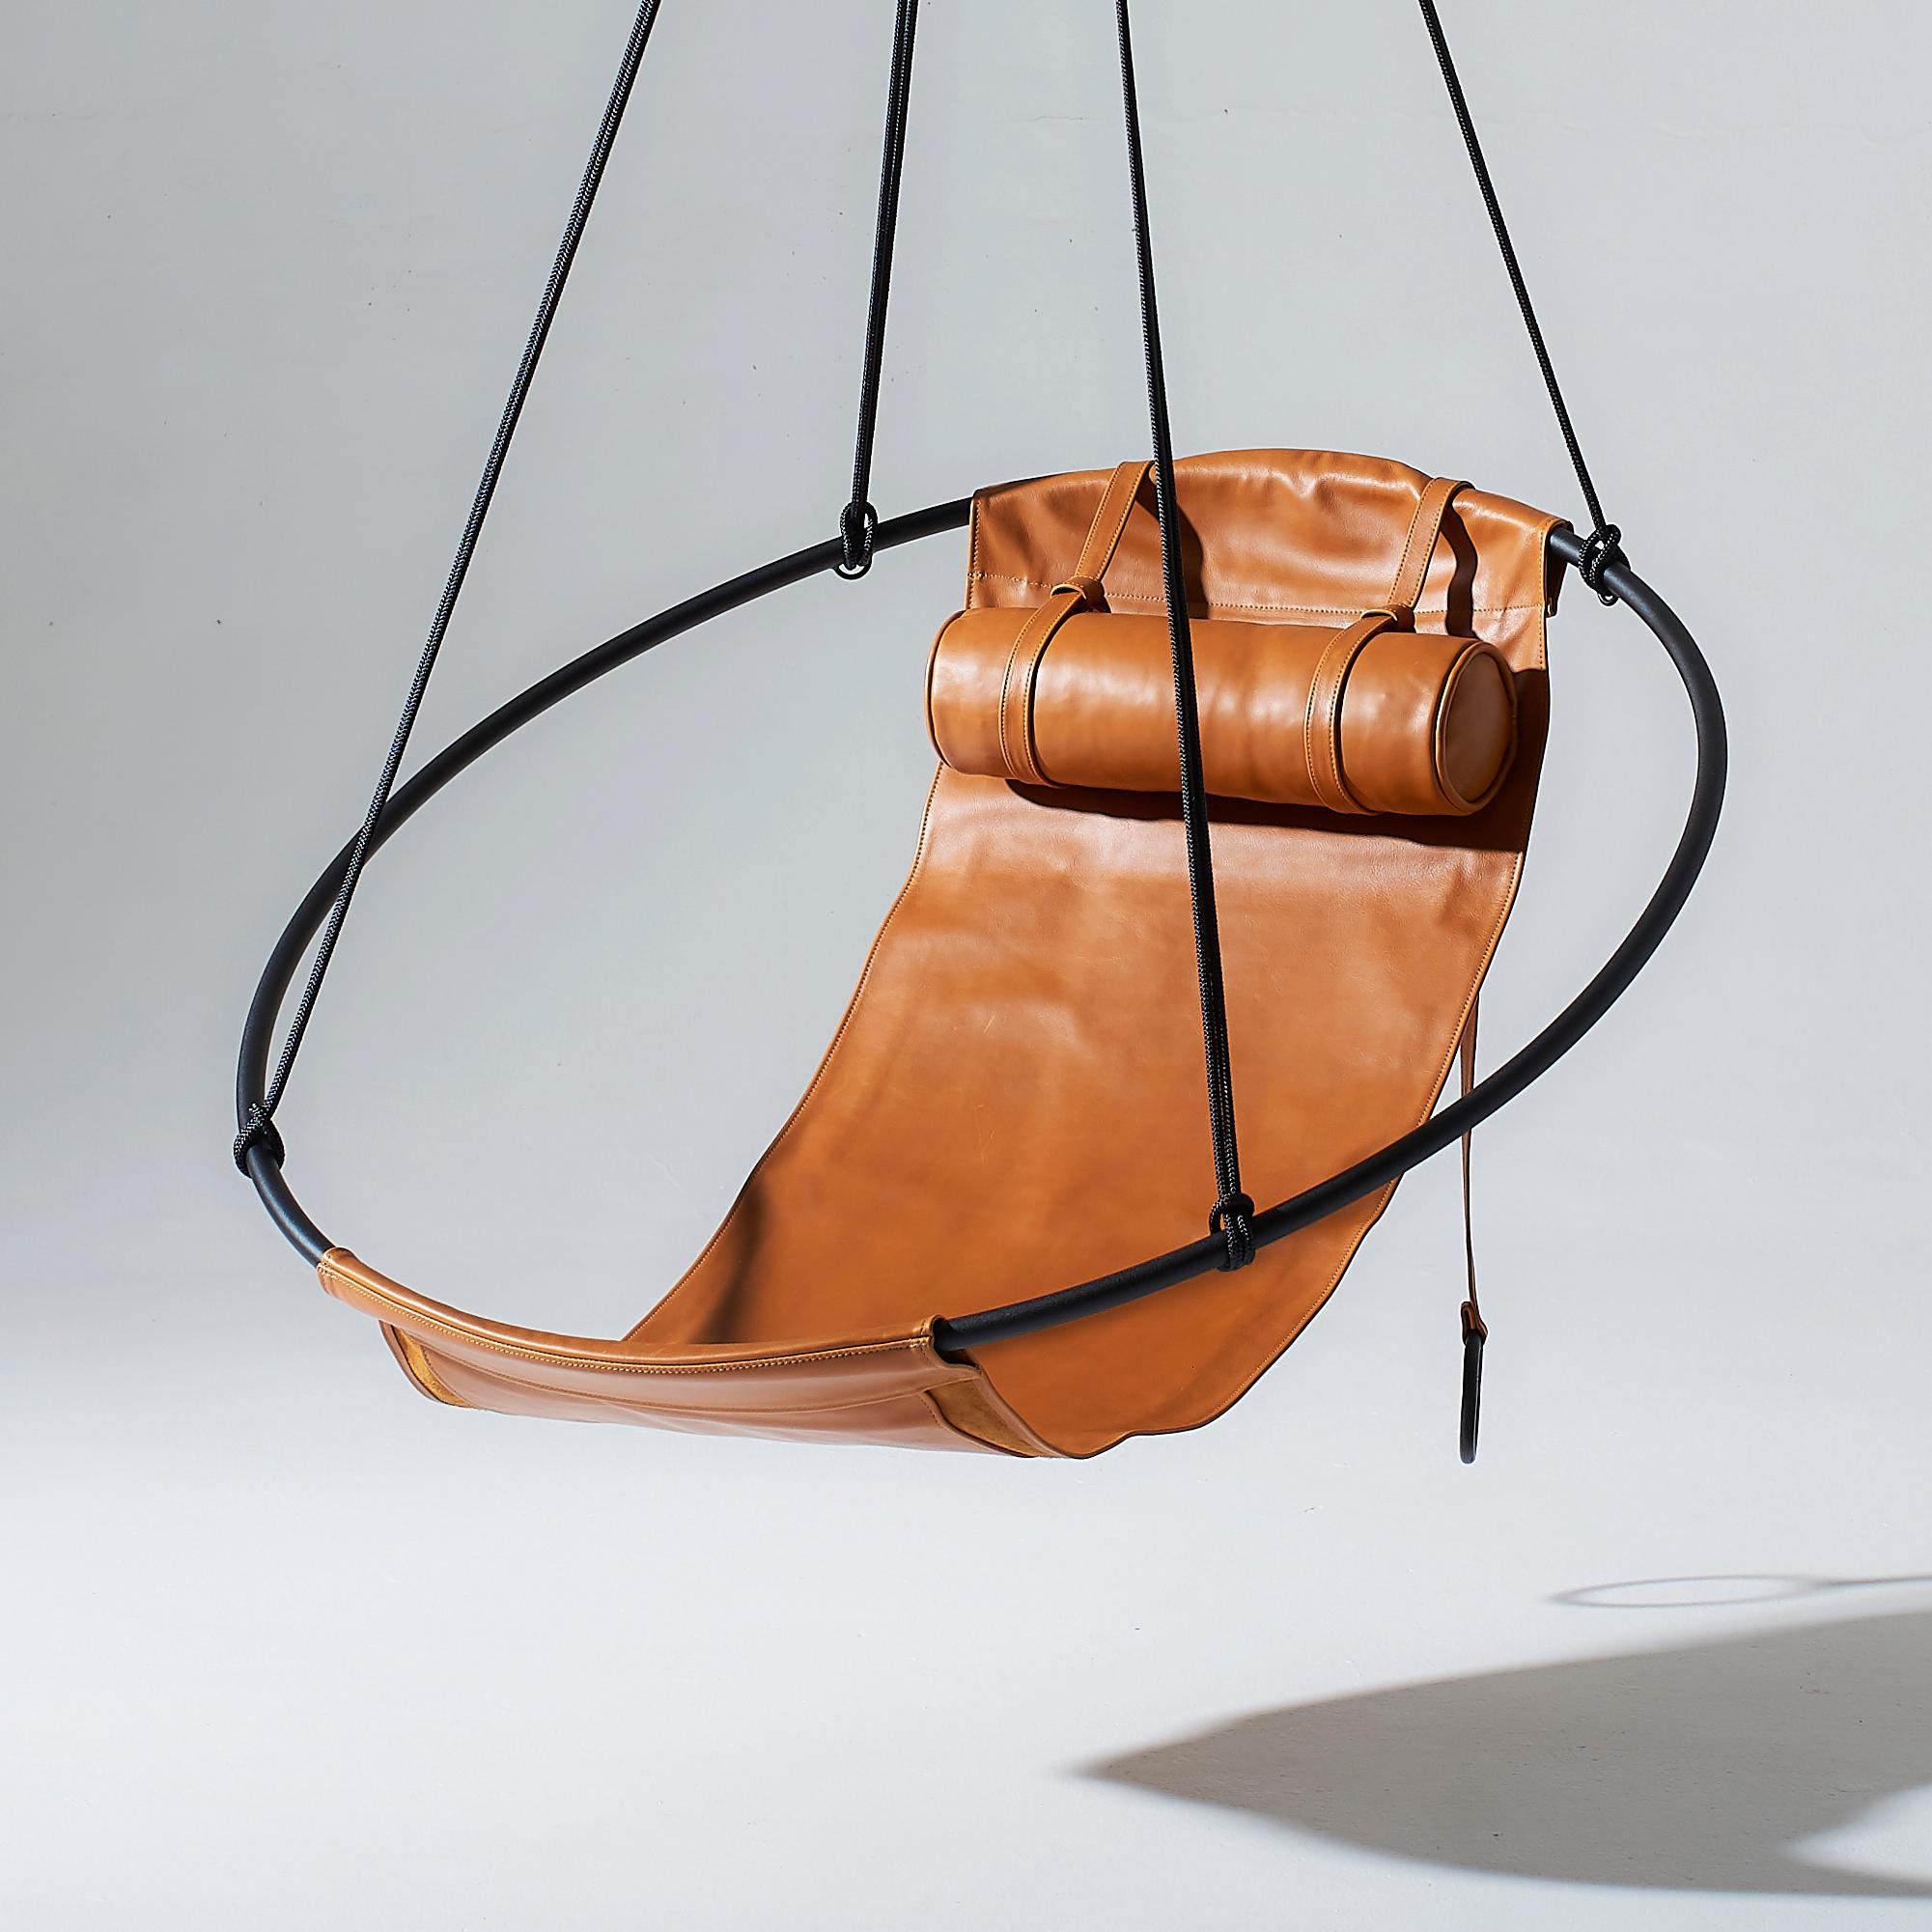 Stripped away from all excess, this hanging chair has a circular frame with the sheets of soft leather hanging loose within it, to create a sleek, sexy, and oh so comfortable experience. This chair’s clean lines and lightness makes it a perfect fit